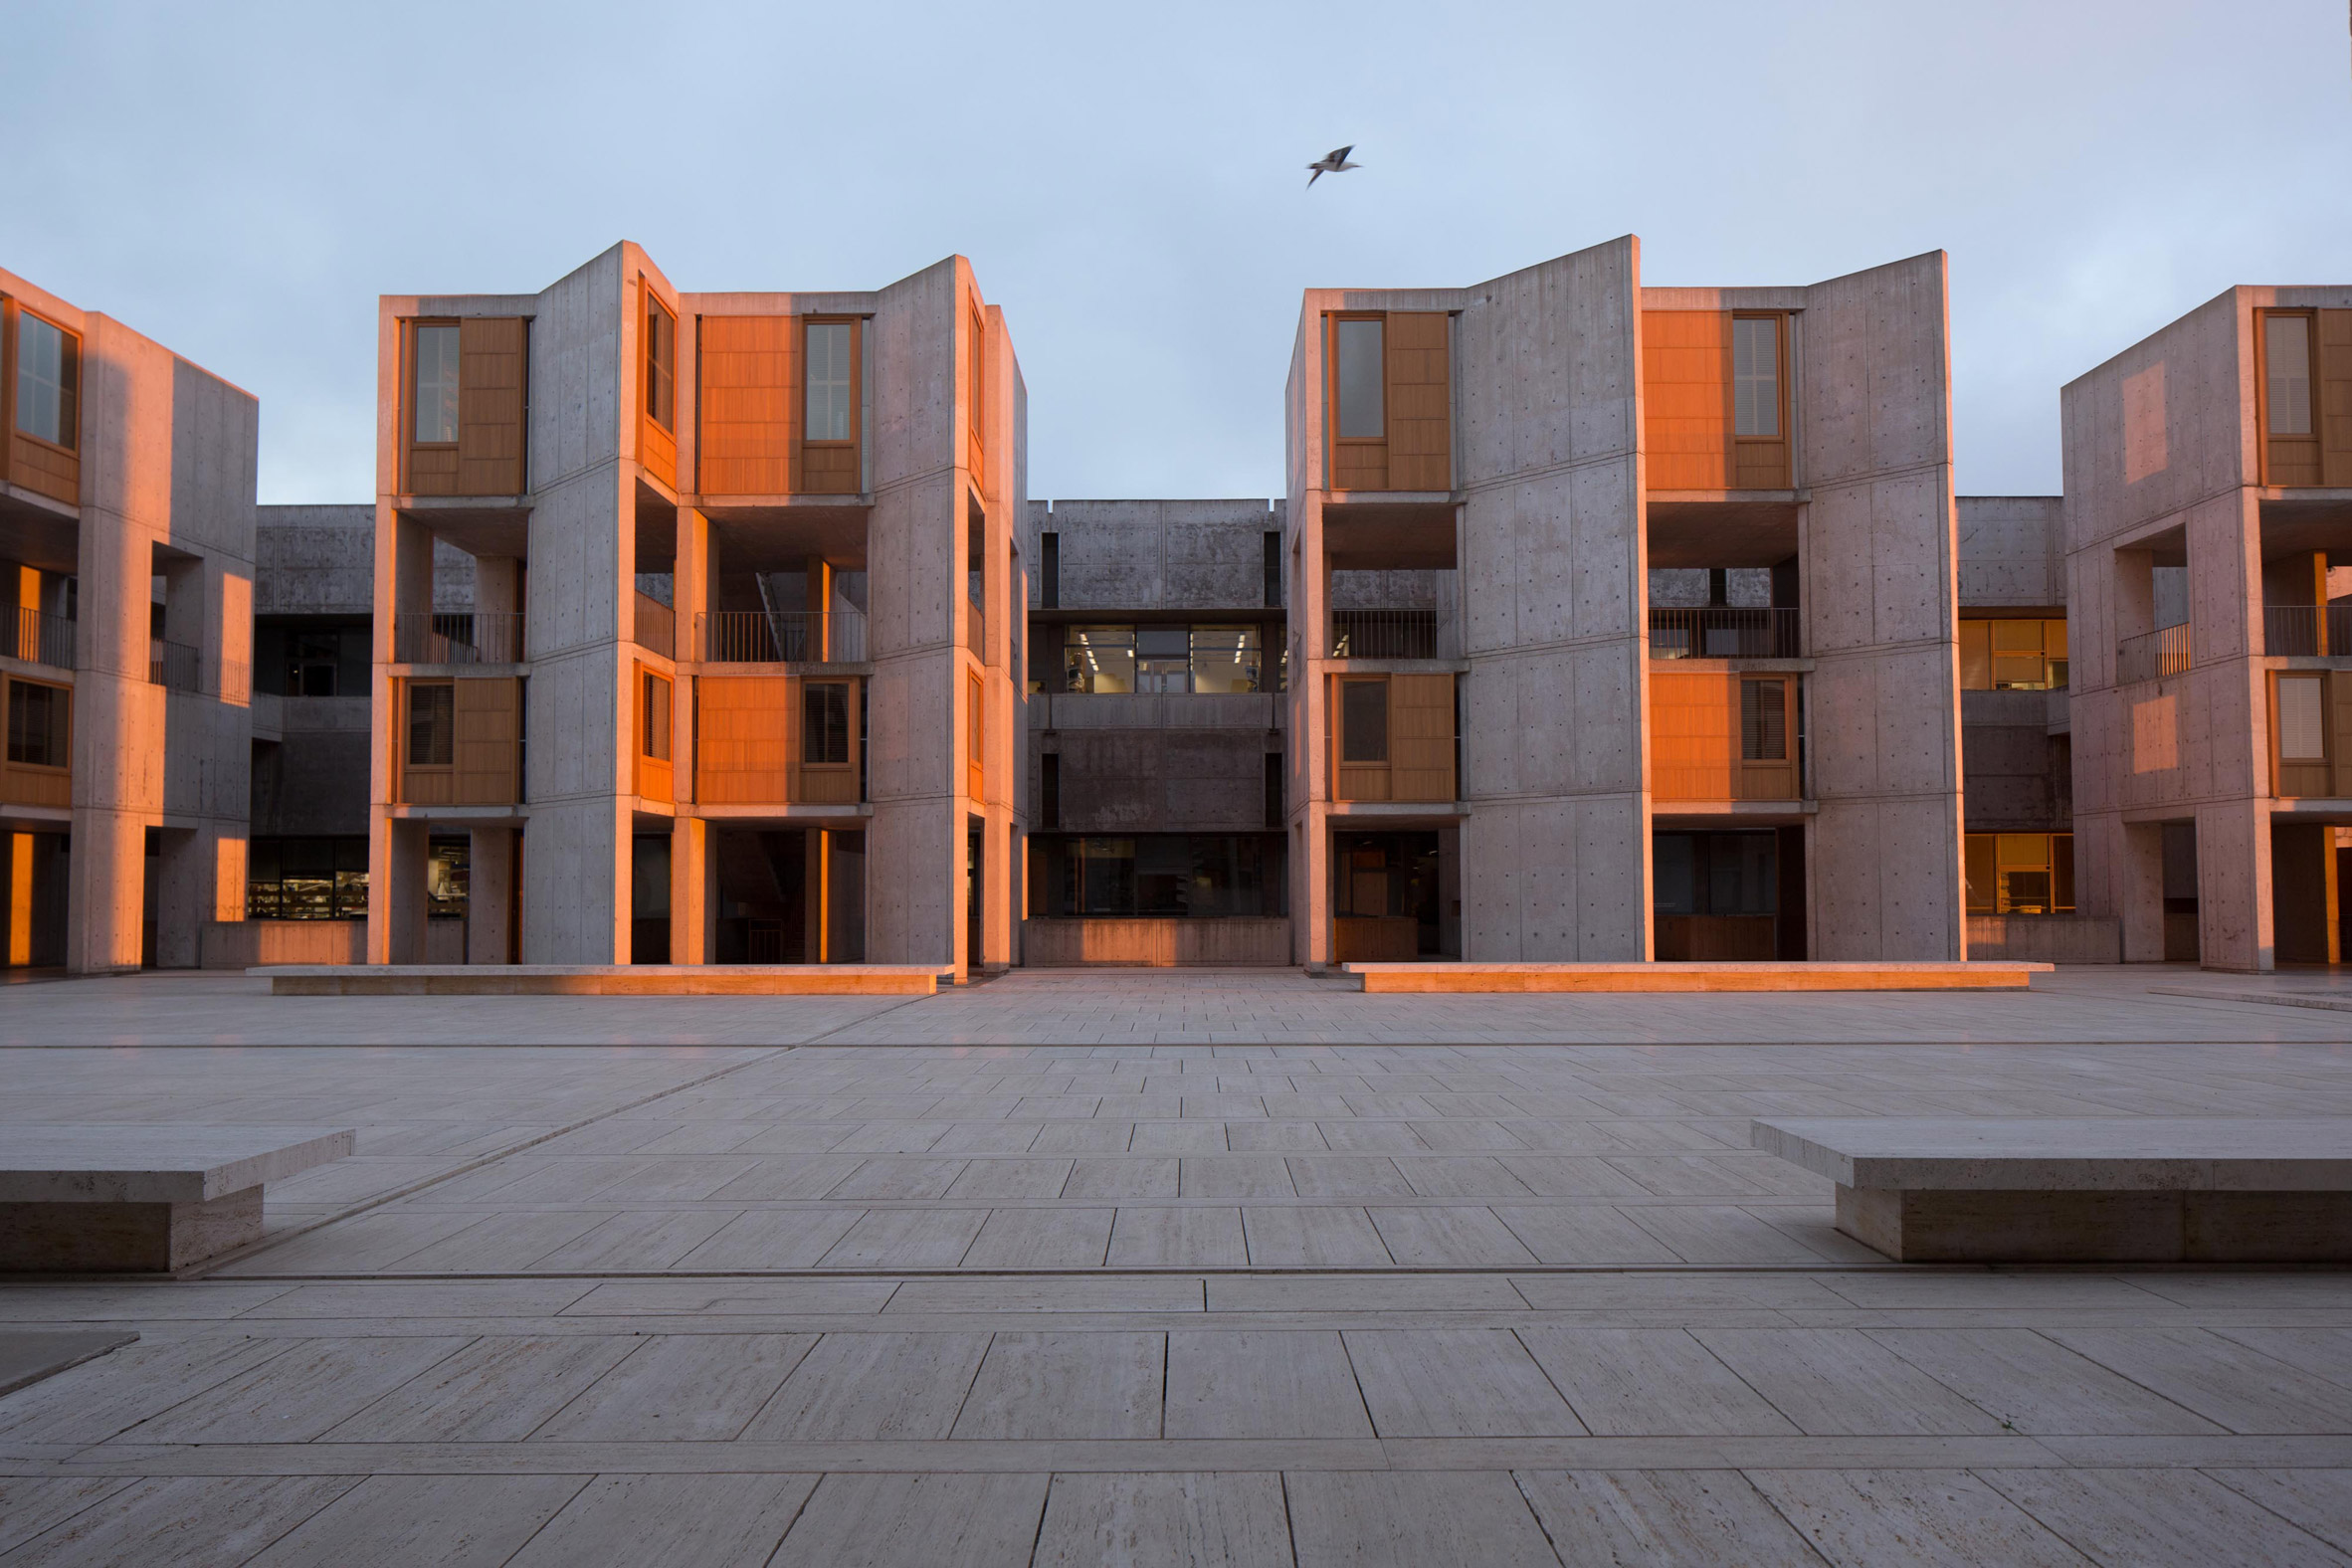 Student Project: Building Analysis of Salk Institute for